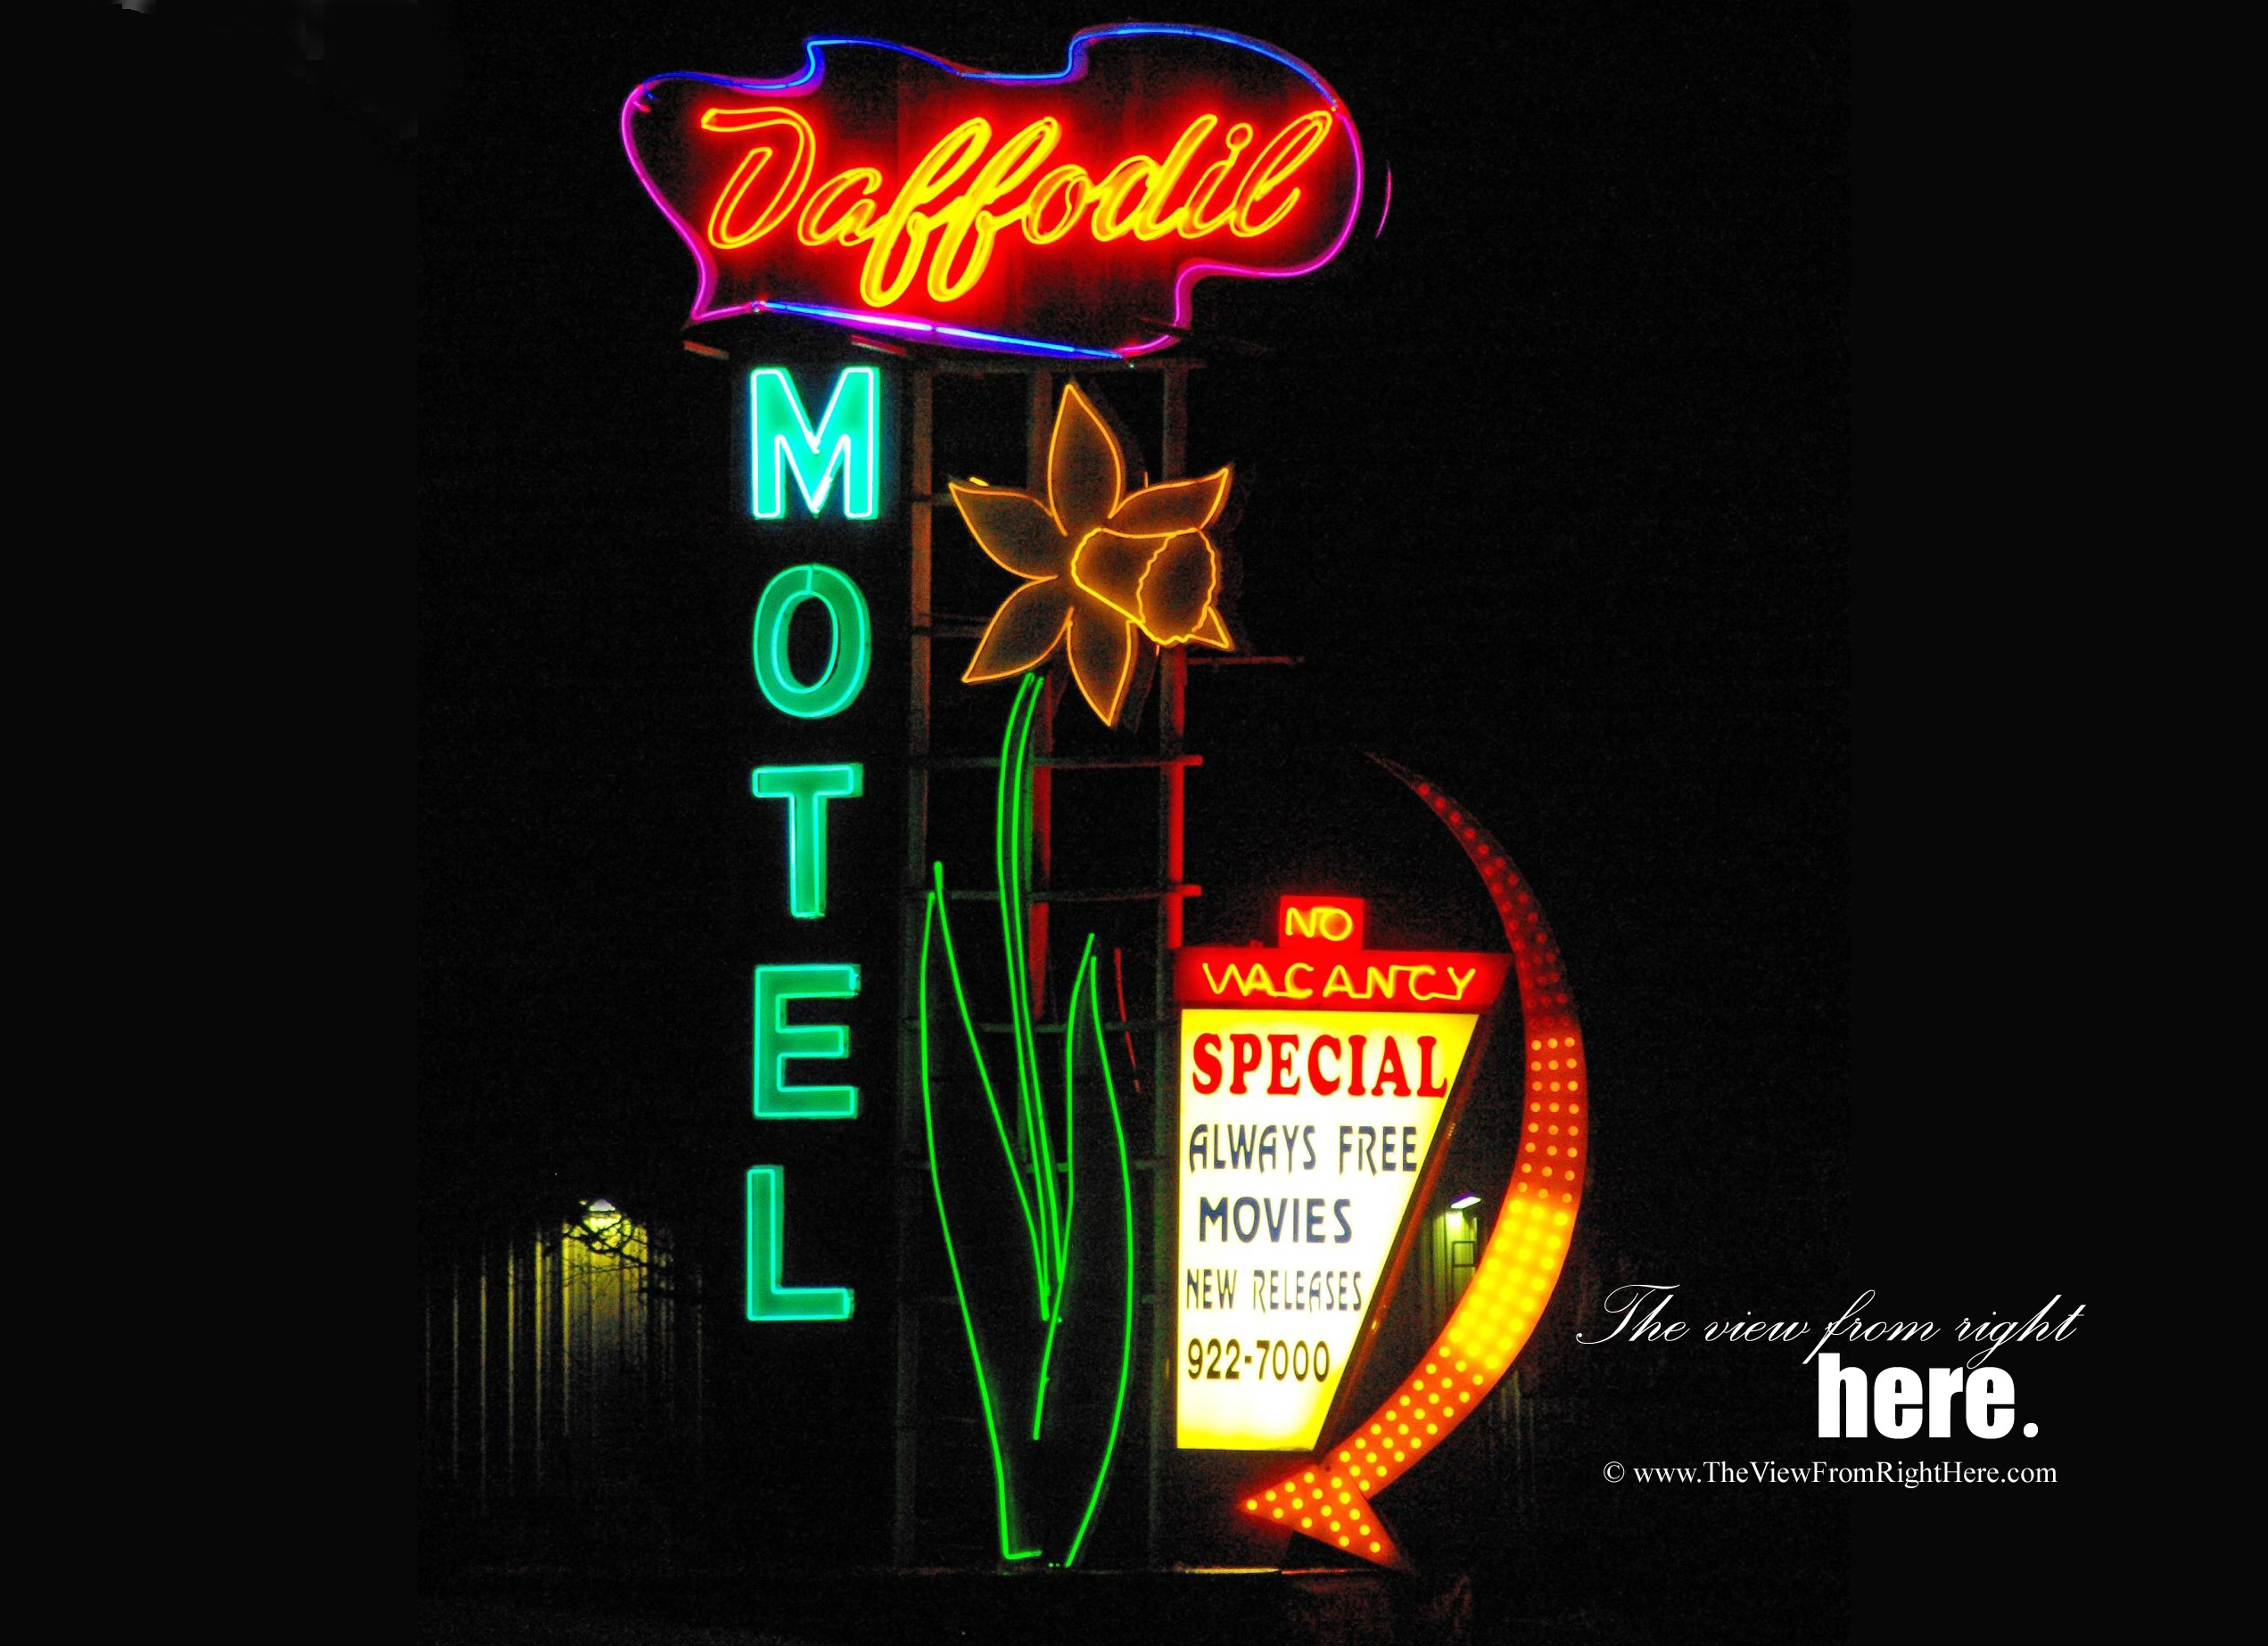 We’ll Leave a Light on For You at the Daffodil Motel